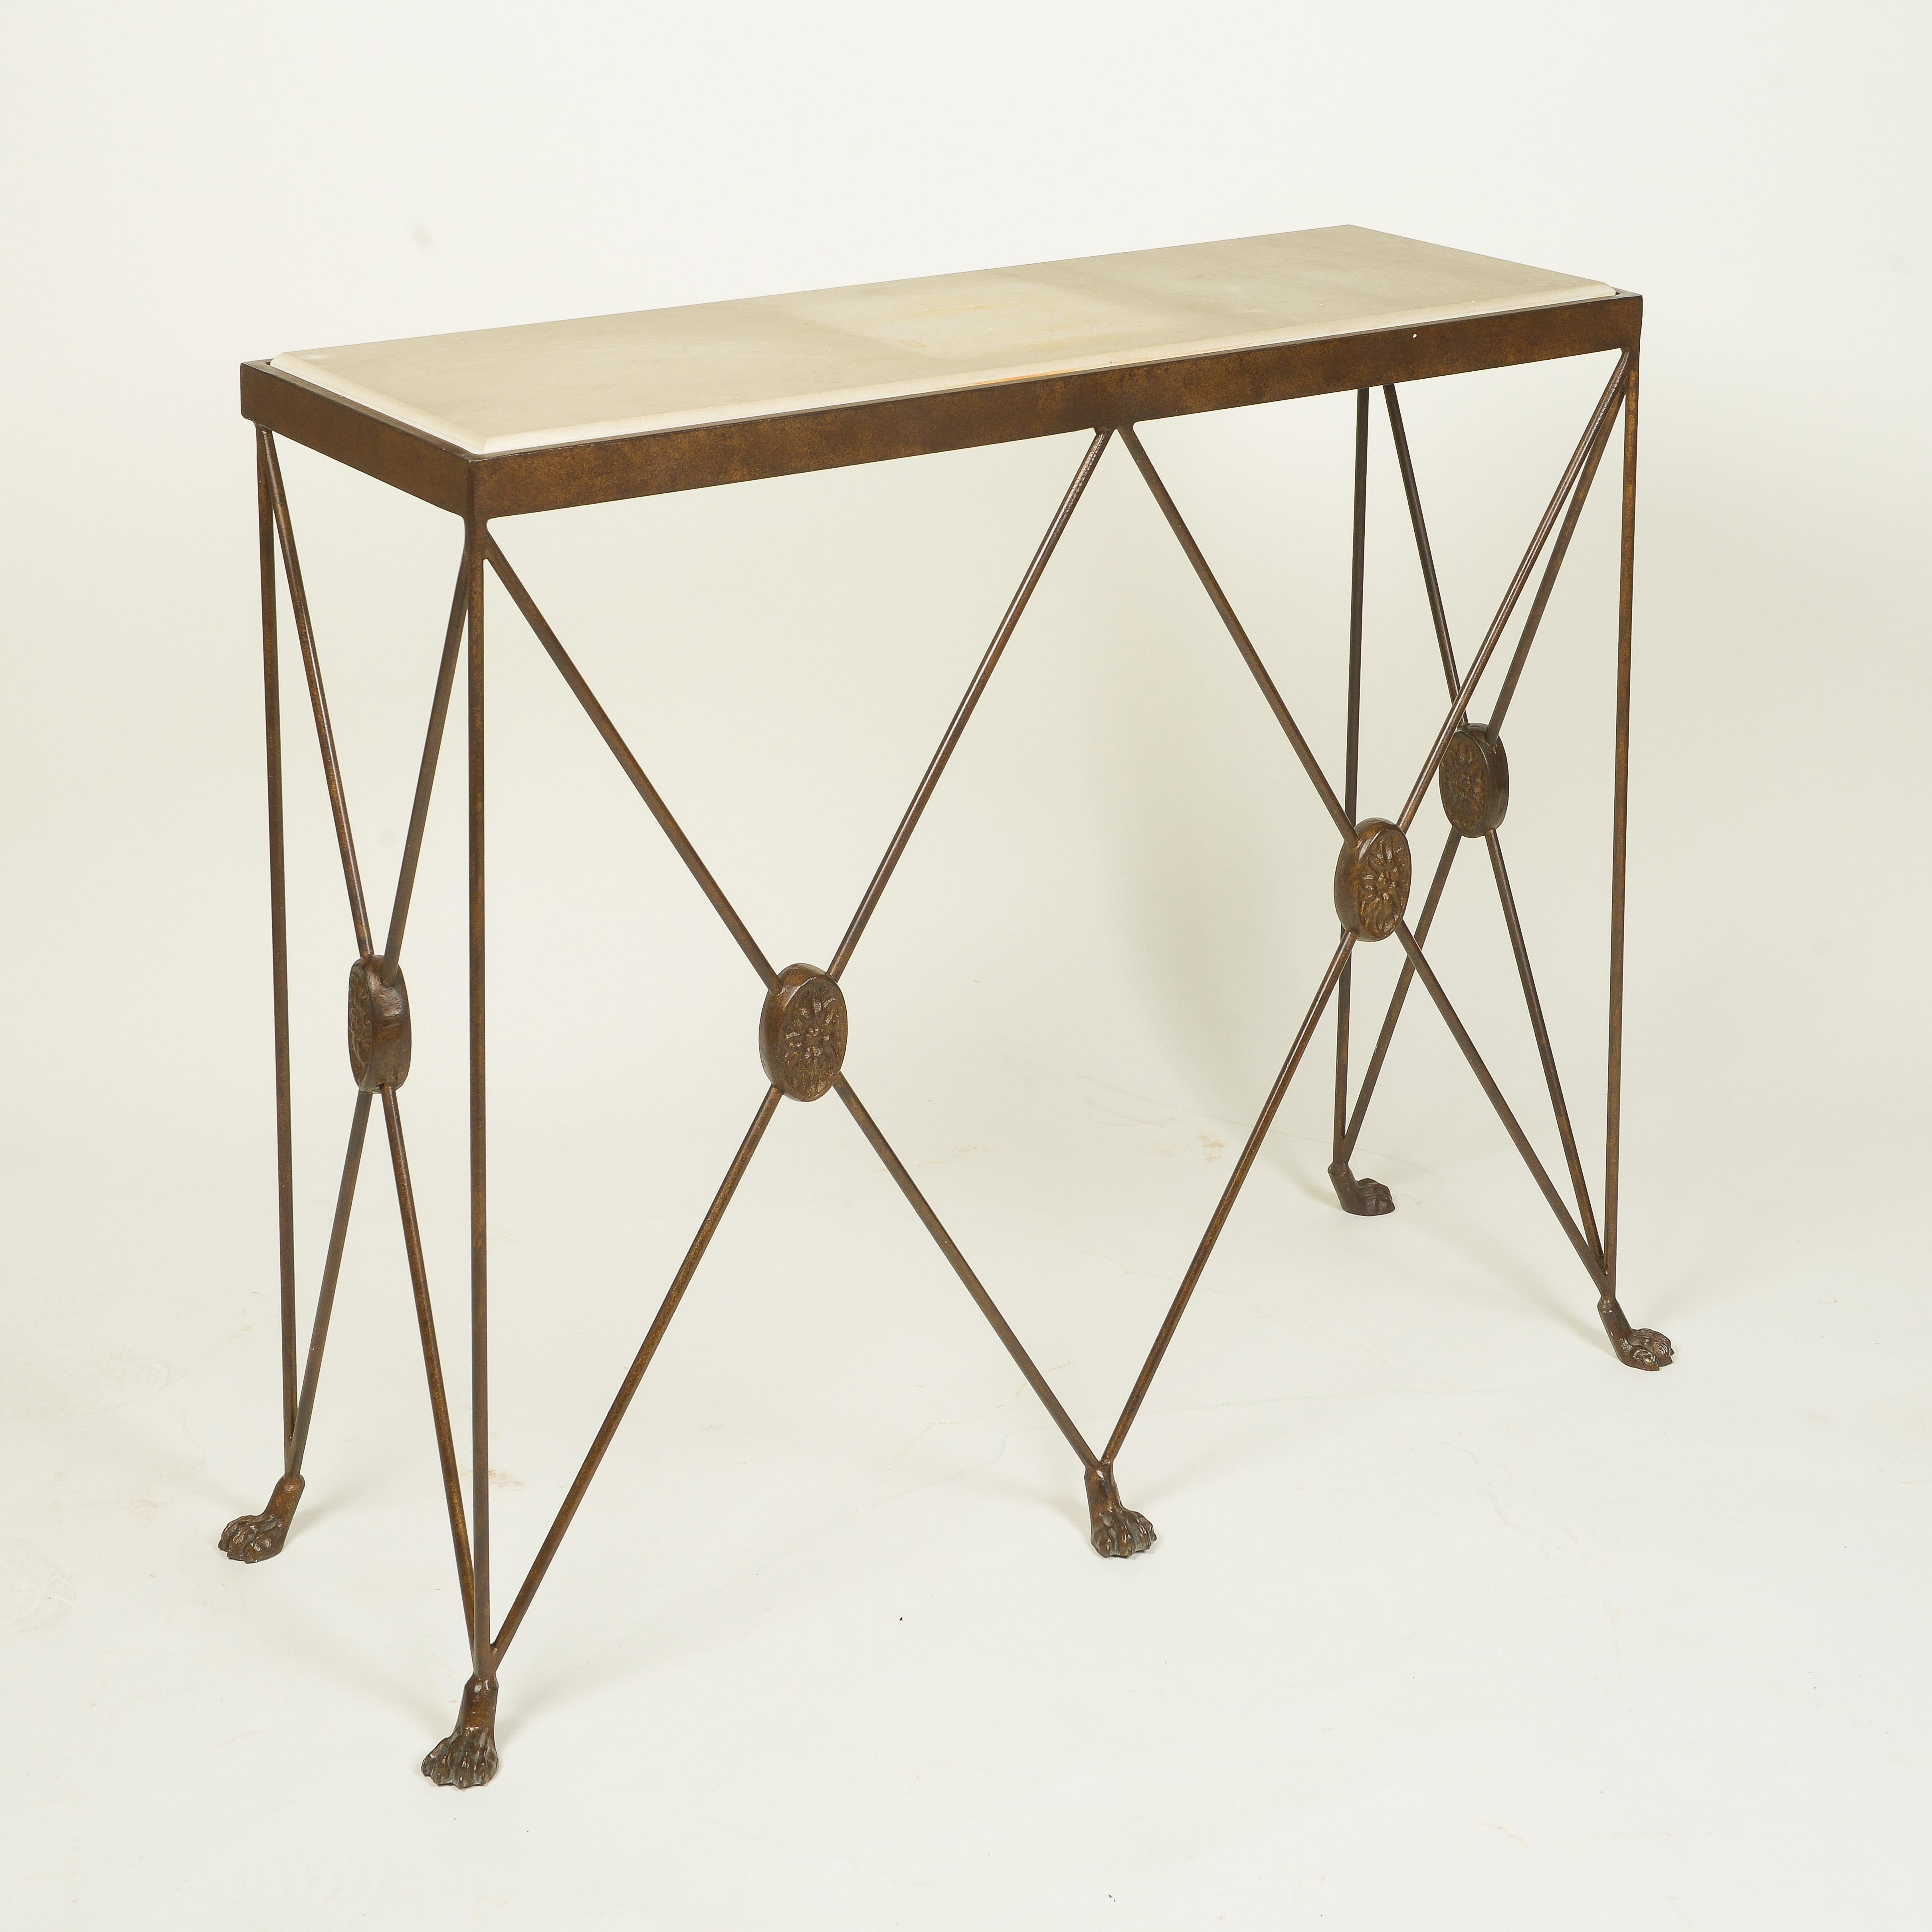 The rectangular white marble top set within a metal edge; raised on X-form supports joined by oval floral rosettes, terminating in paw feet; with an antiqued gilt finish to the metal.